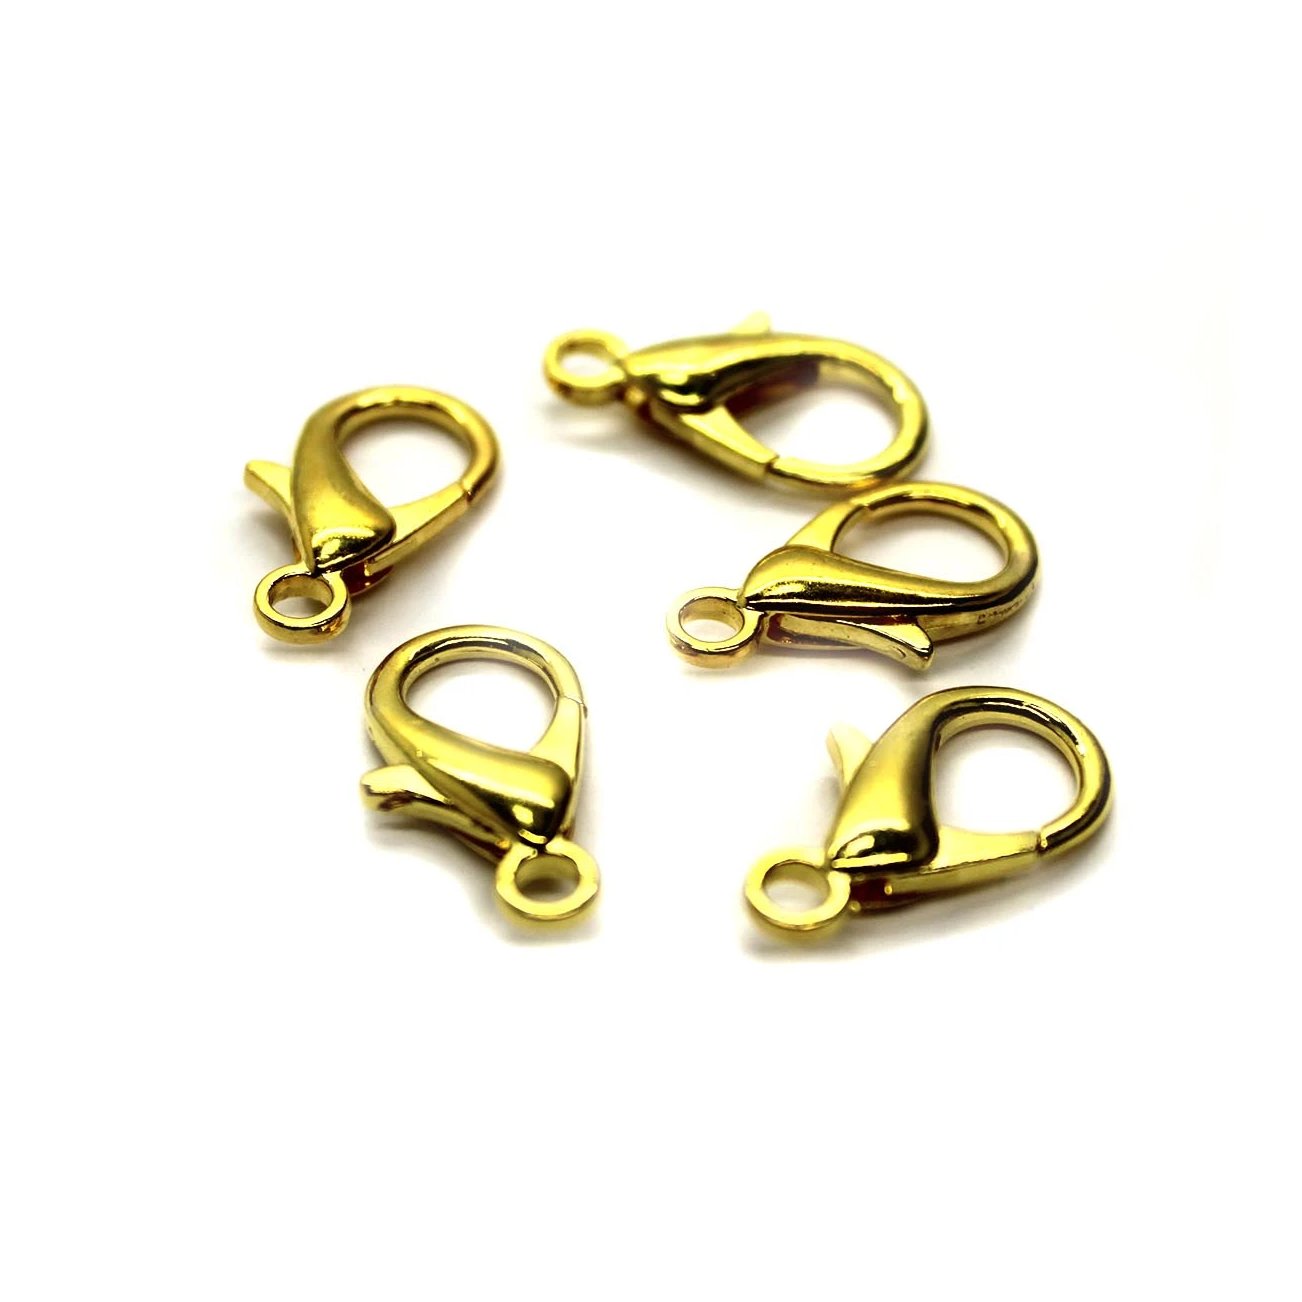 Clasp, Lobster, Gold, Alloy, 23mm x 12mm, Sold Per pkg of 10